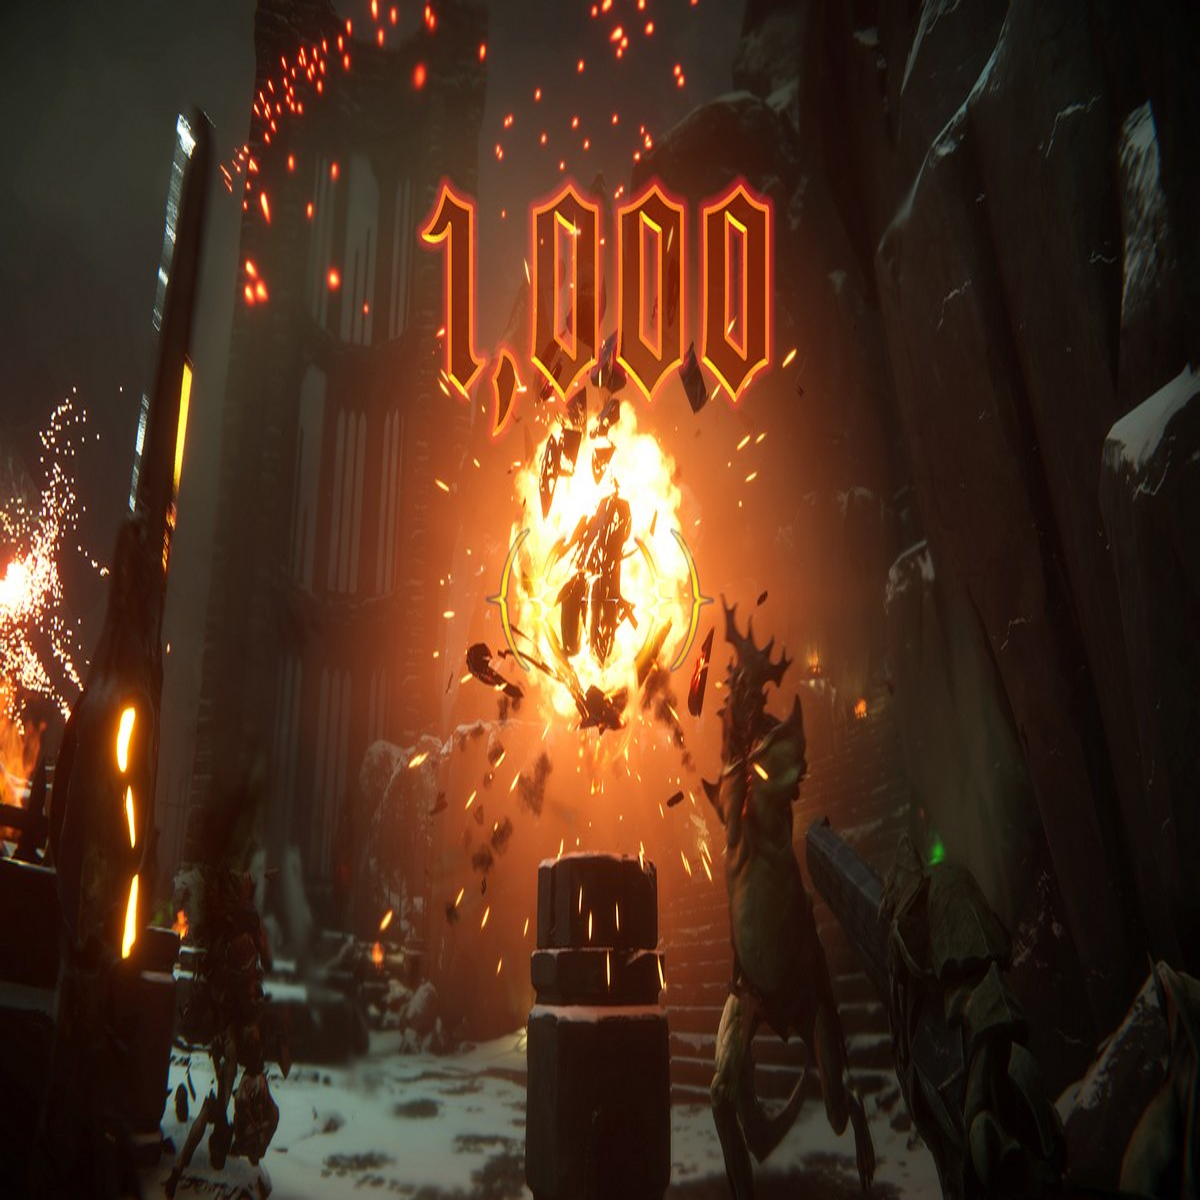 Metal: Hellsinger Now Available on PC, Xbox Series and PS5 – Game Chronicles